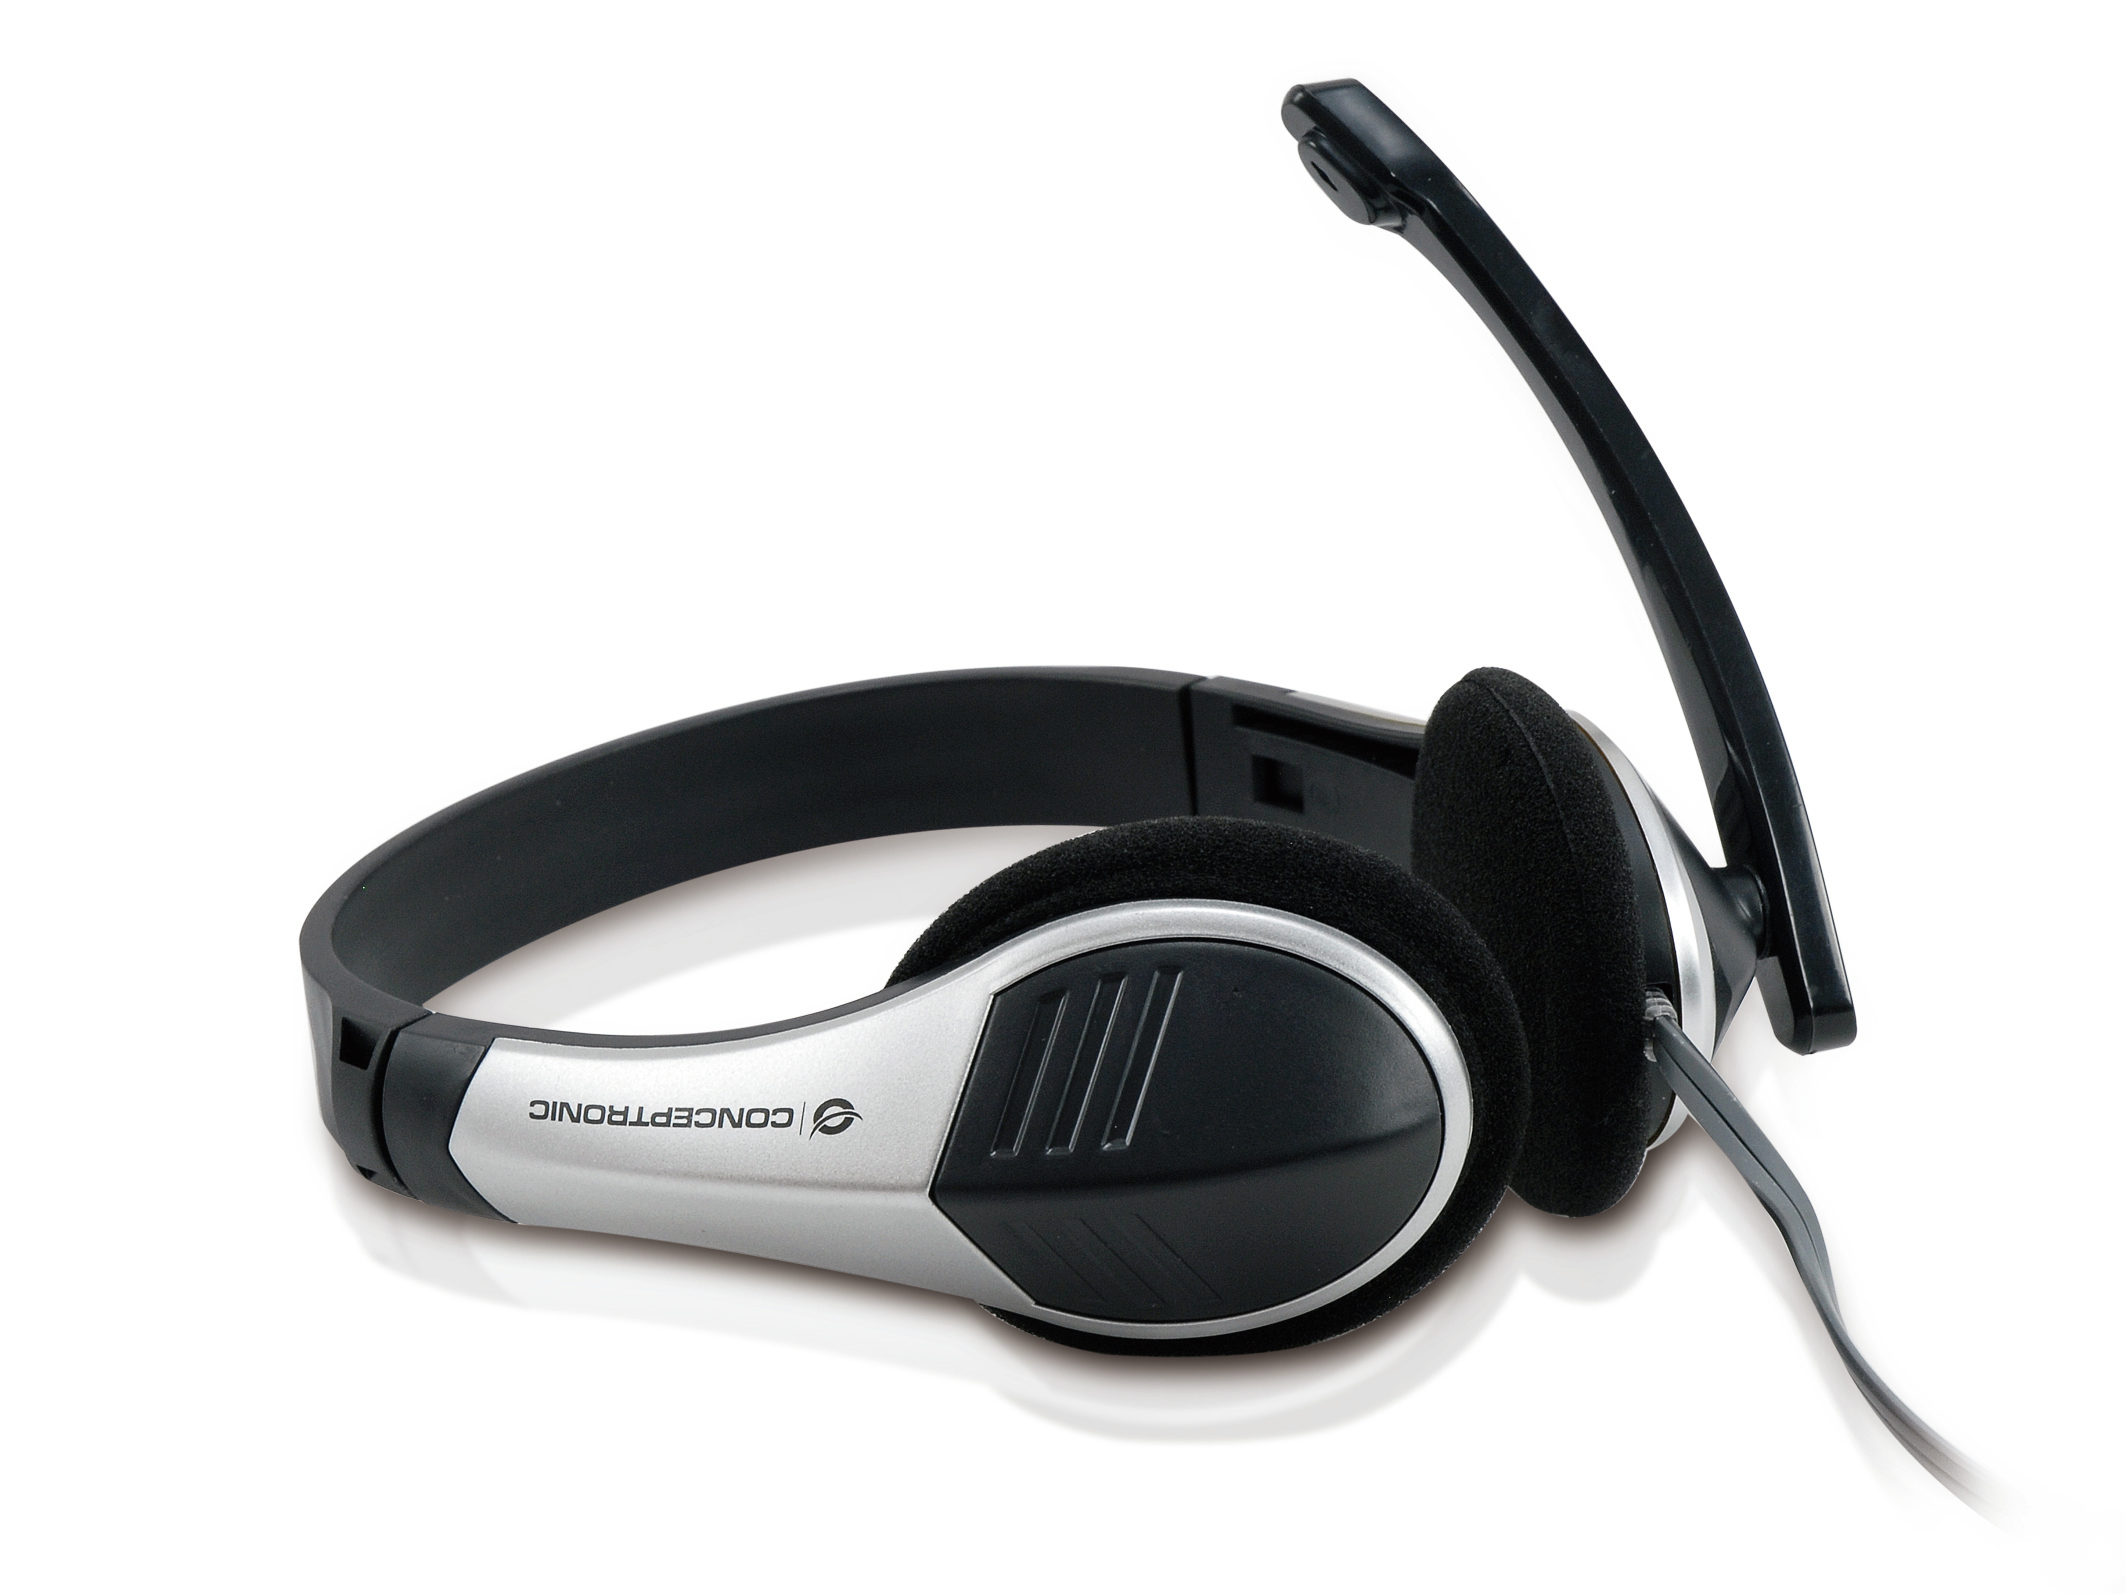 CONCEPTRONIC Headset Klinke 2m Kabel,Mikro,int.Bed.Stereo si